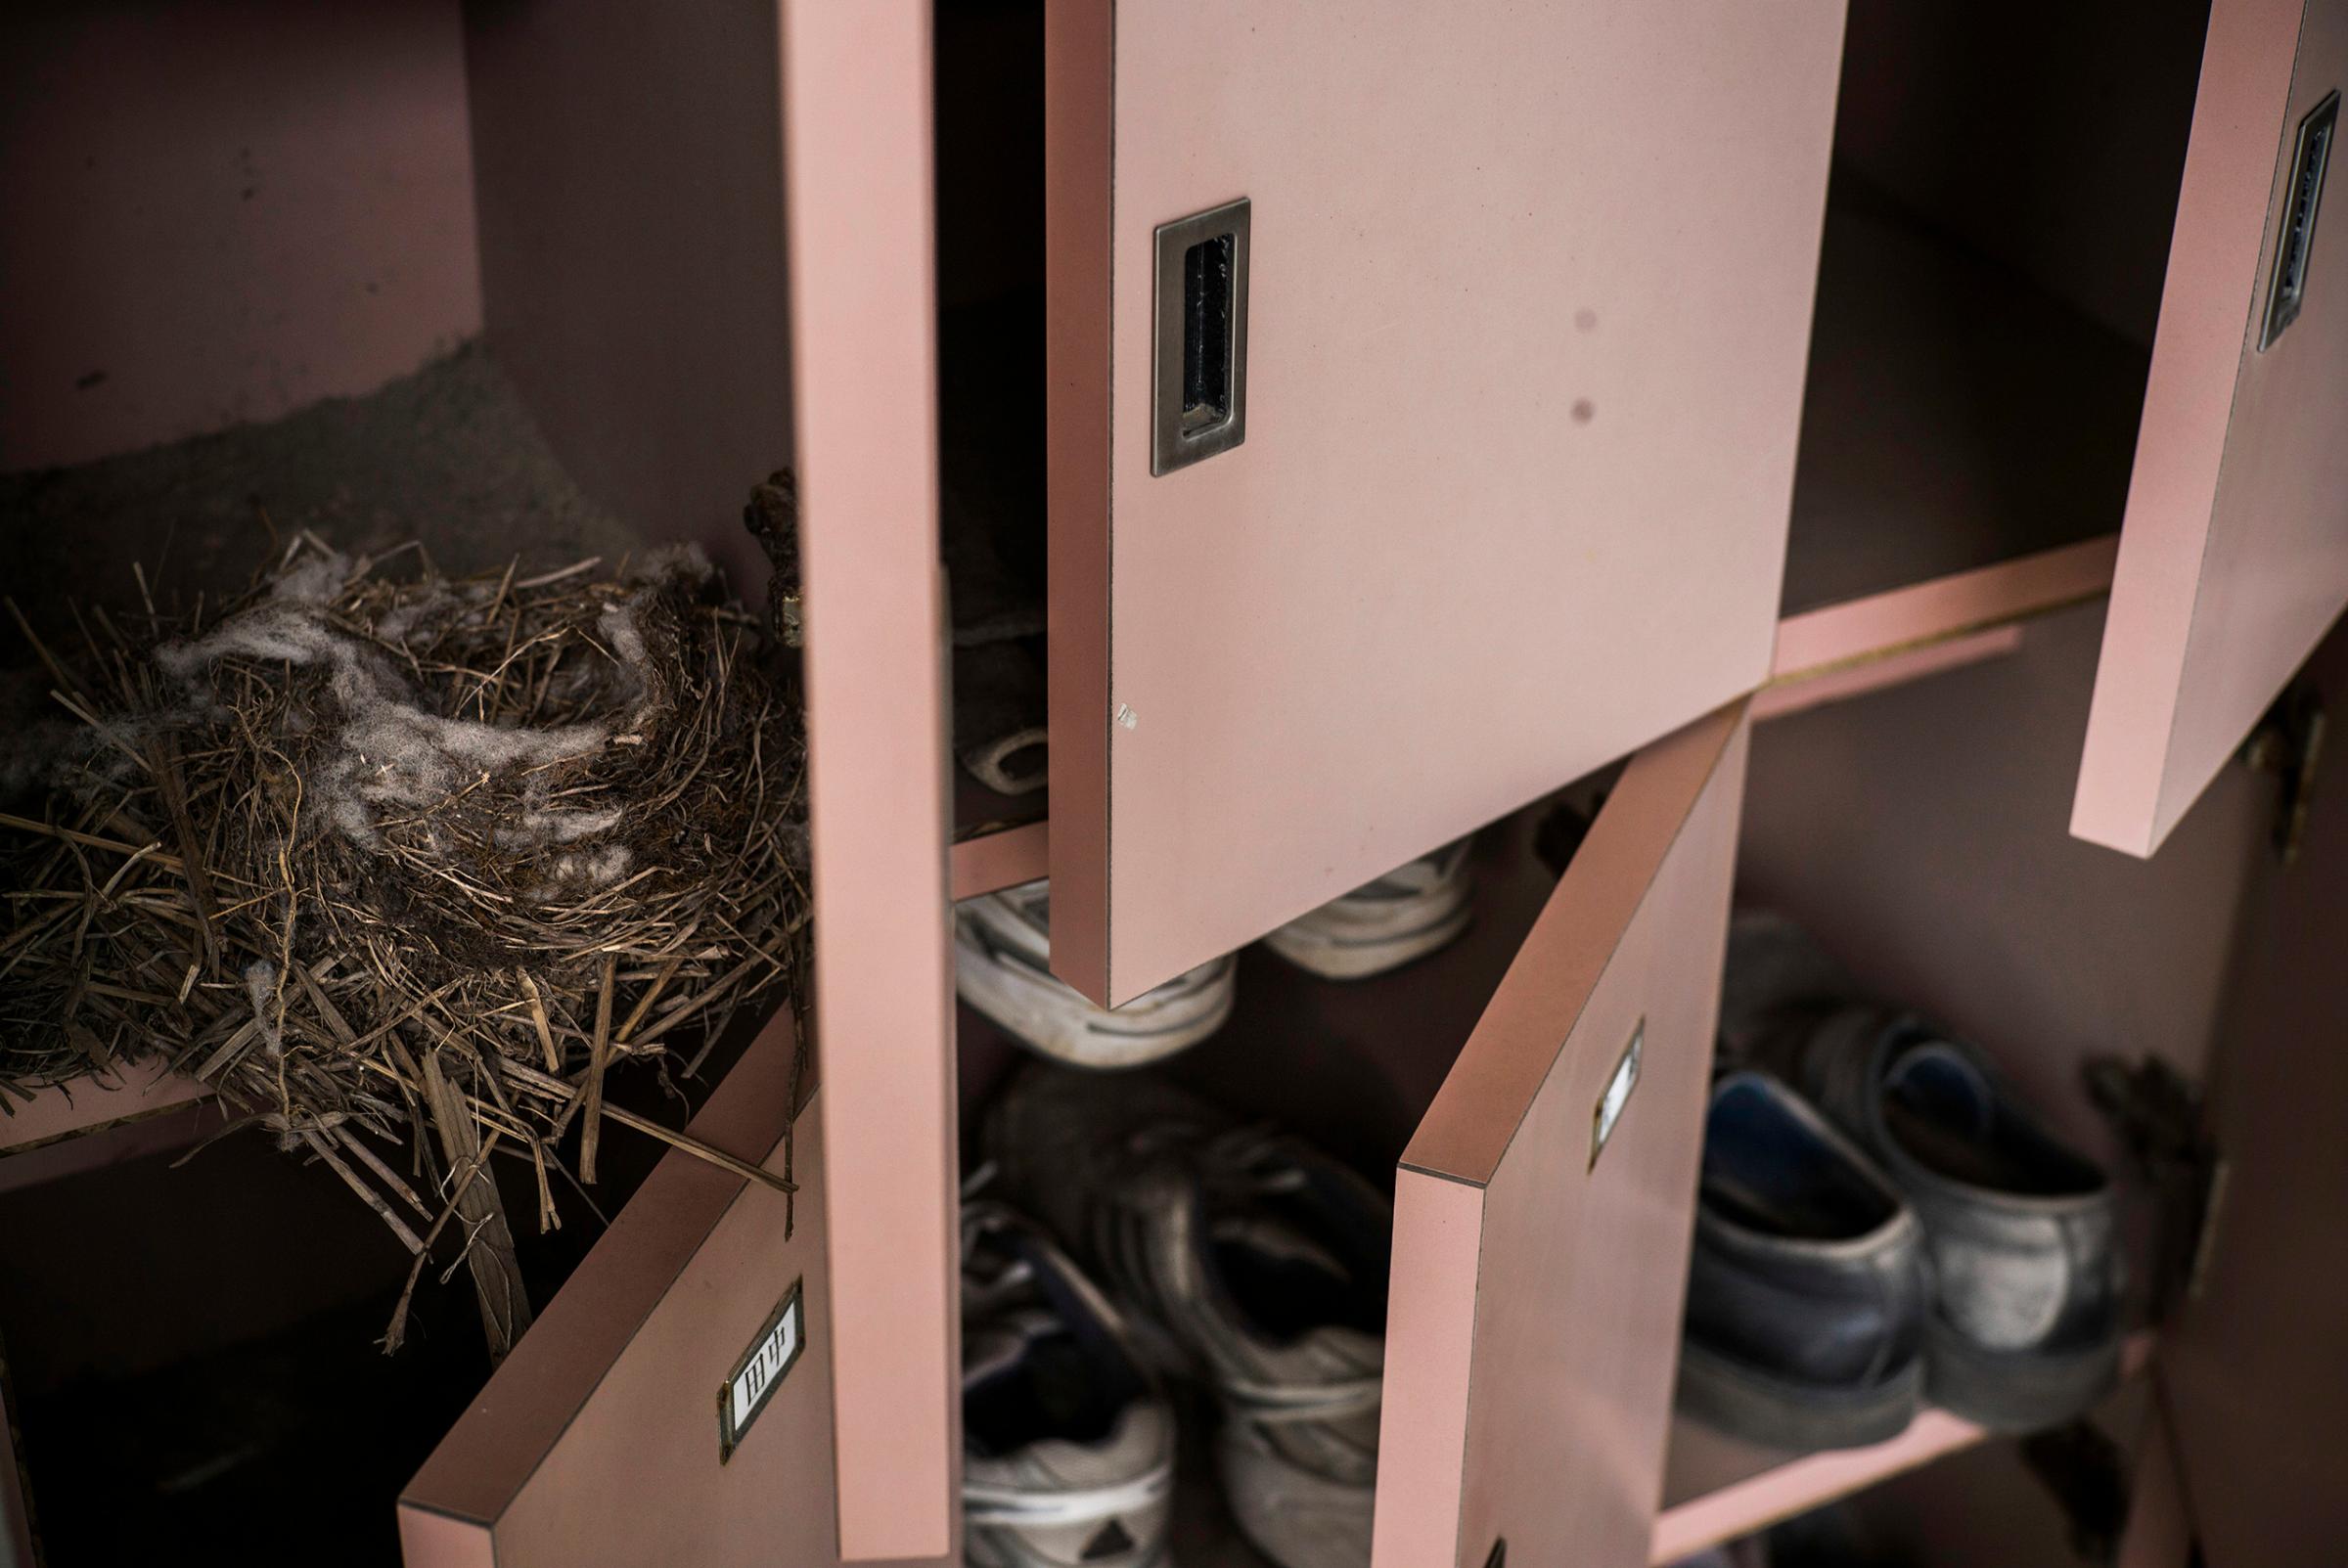 A birds nest can be seen inside a locker at a Ukedo elementary school, which was damaged by the tsunami, inside the restricted 20km exclusion zone, Namie, March 10, 2016.